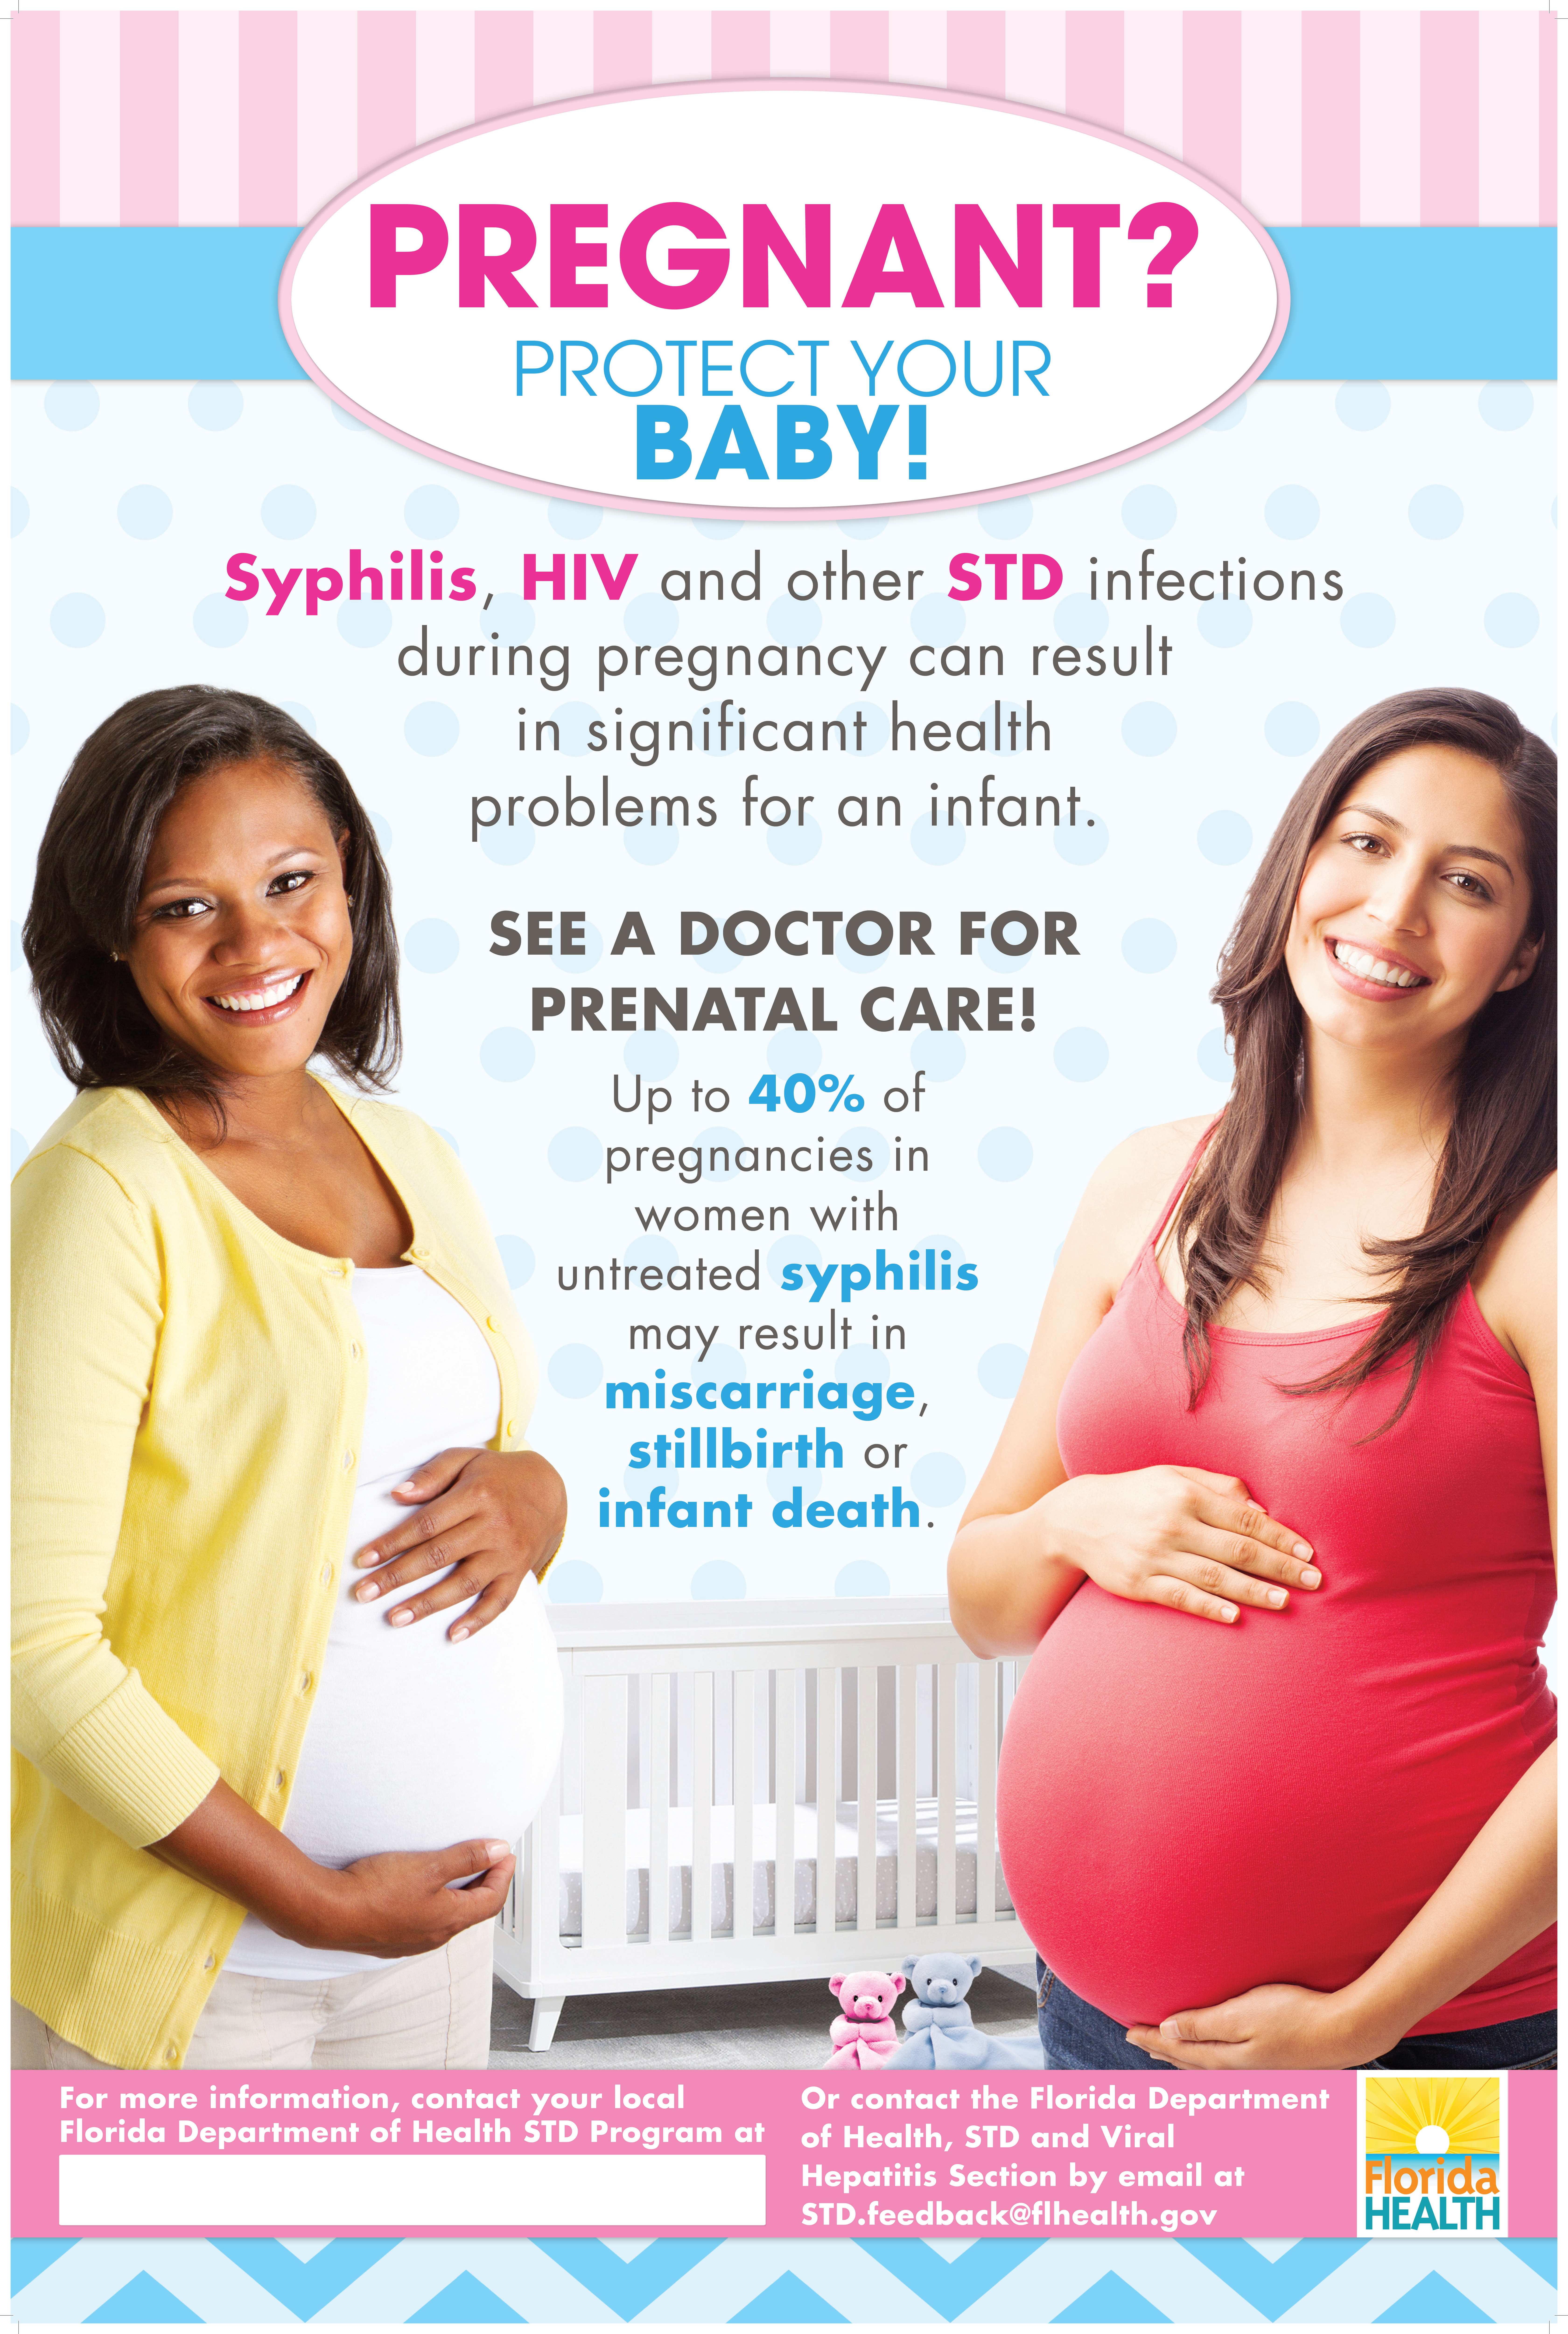 Pregnant? Protect your Baby! See a Doctor for Prenatal Care!